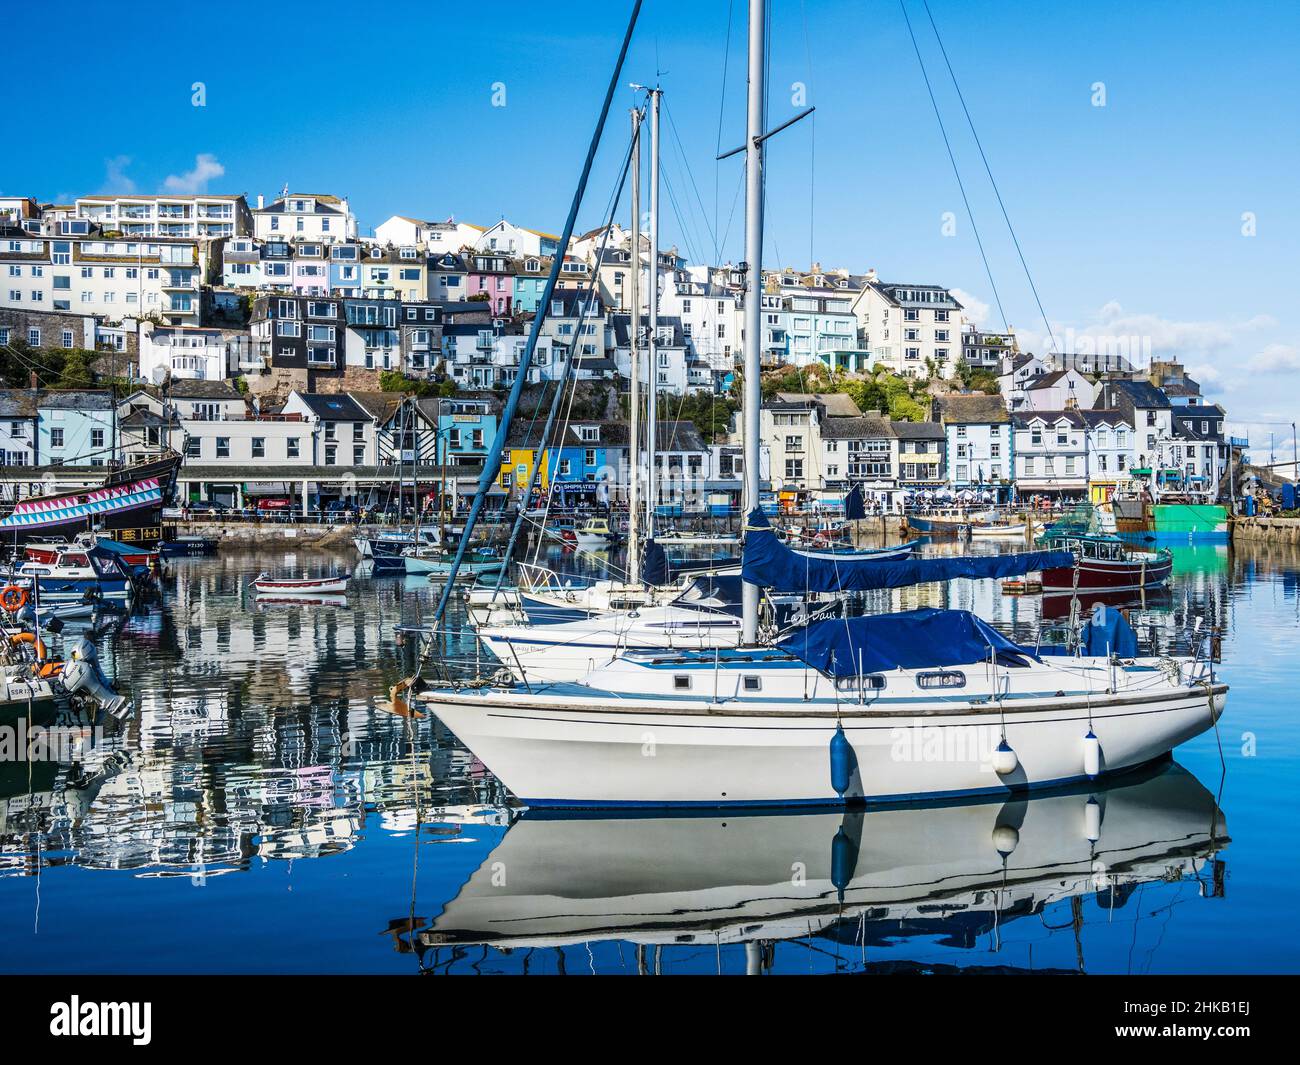 A sunny day at Brixham in south Devon. Stock Photo